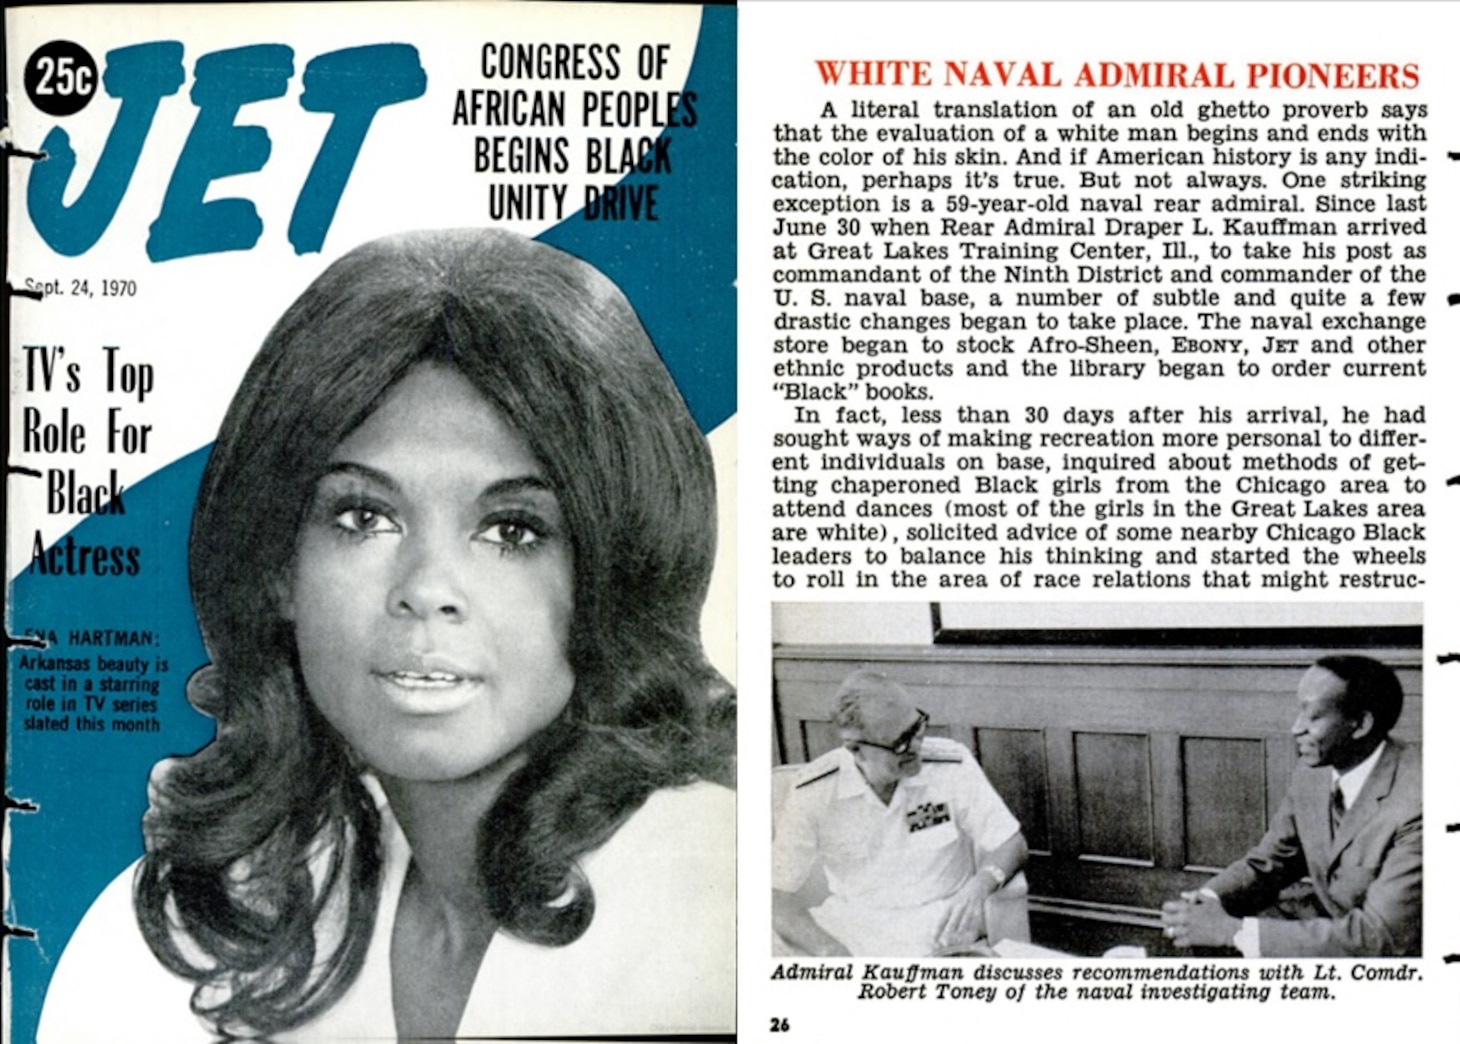 “White Naval Admiral Pioneers Race Relations at Great Lakes,” Jet (September 24, 1970), 26-29.